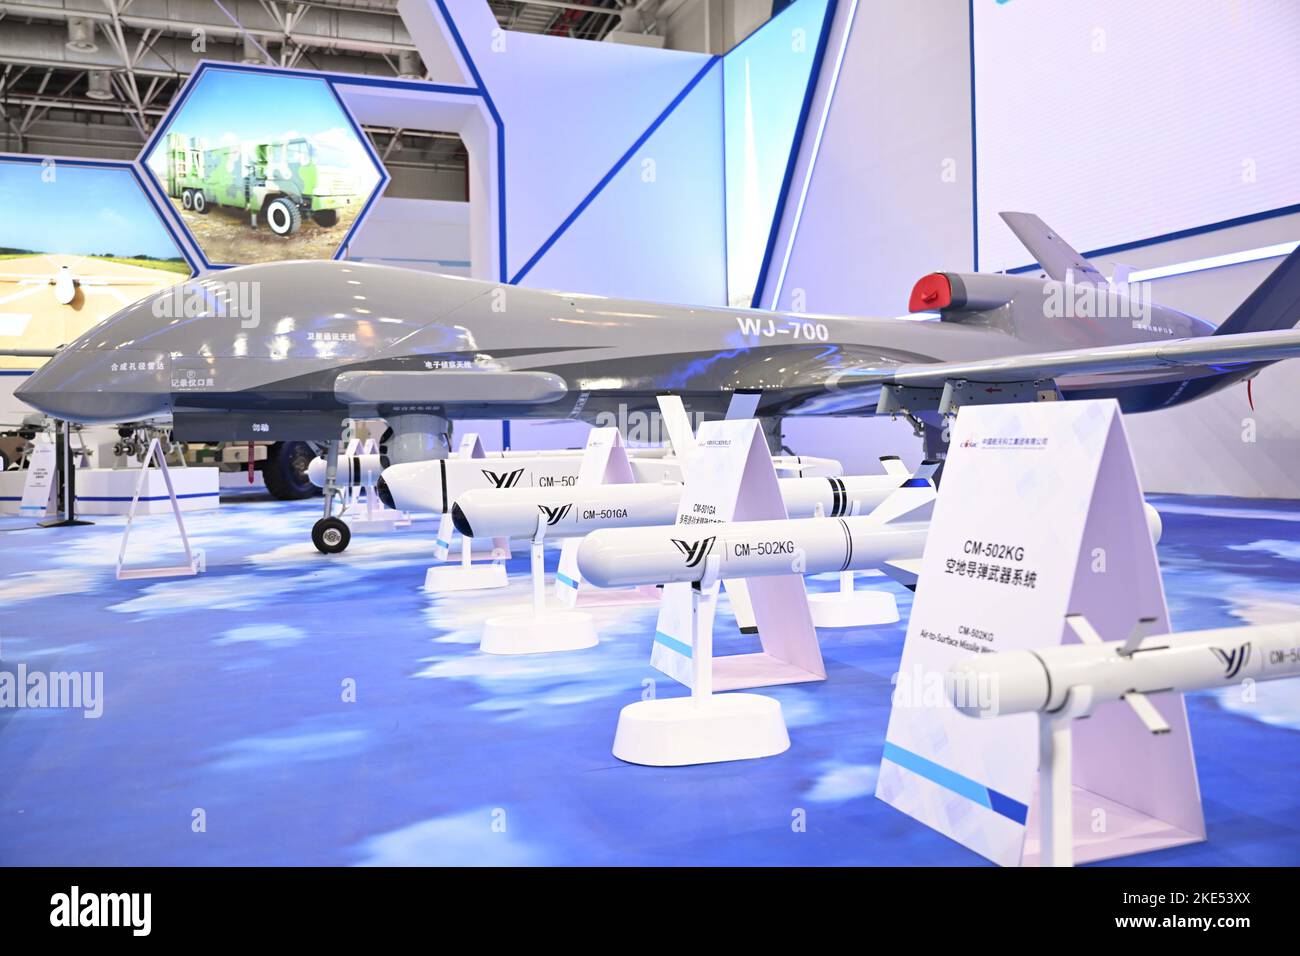 Zhuhai. 9th Nov, 2022. This photo taken on Nov. 9, 2022 shows a WJ-700 unmanned aerial vehicle (UAV) displayed at the 14th China International Aviation and Aerospace Exhibition, also known as Airshow China, in the port city of Zhuhai, south China's Guangdong Province. A range of China's homegrown unmanned aerial vehicles (UAVs) and anti-drone system are showcased at the 14th Airshow China. Credit: Deng Hua/Xinhua/Alamy Live News Stock Photo